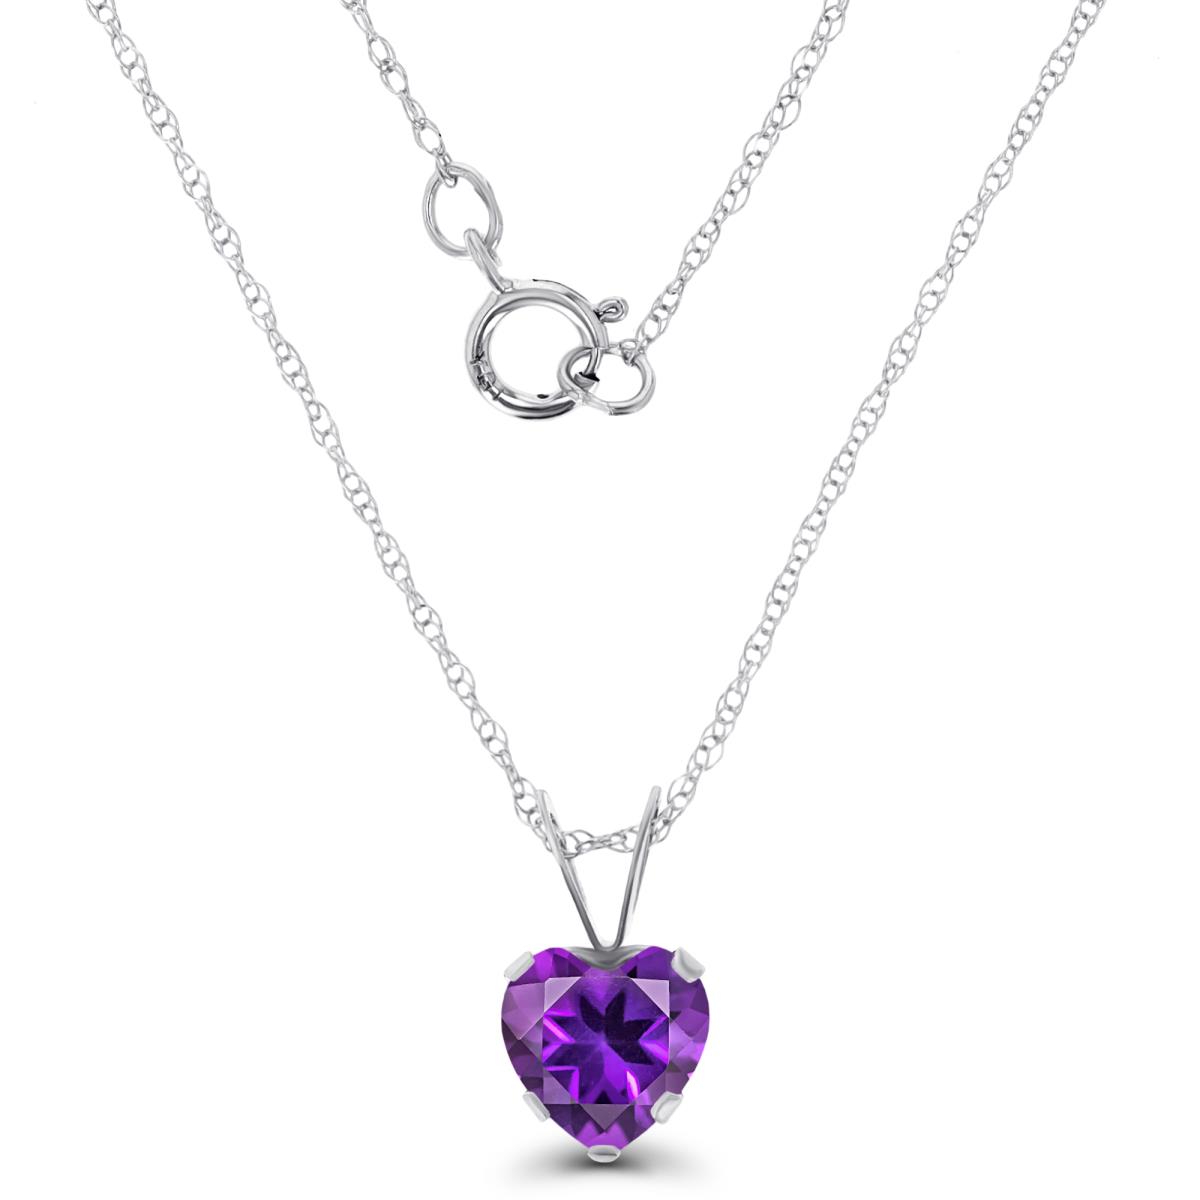 14K White Gold 6x6mm Heart Amethyst 18" Rope Chain Necklace